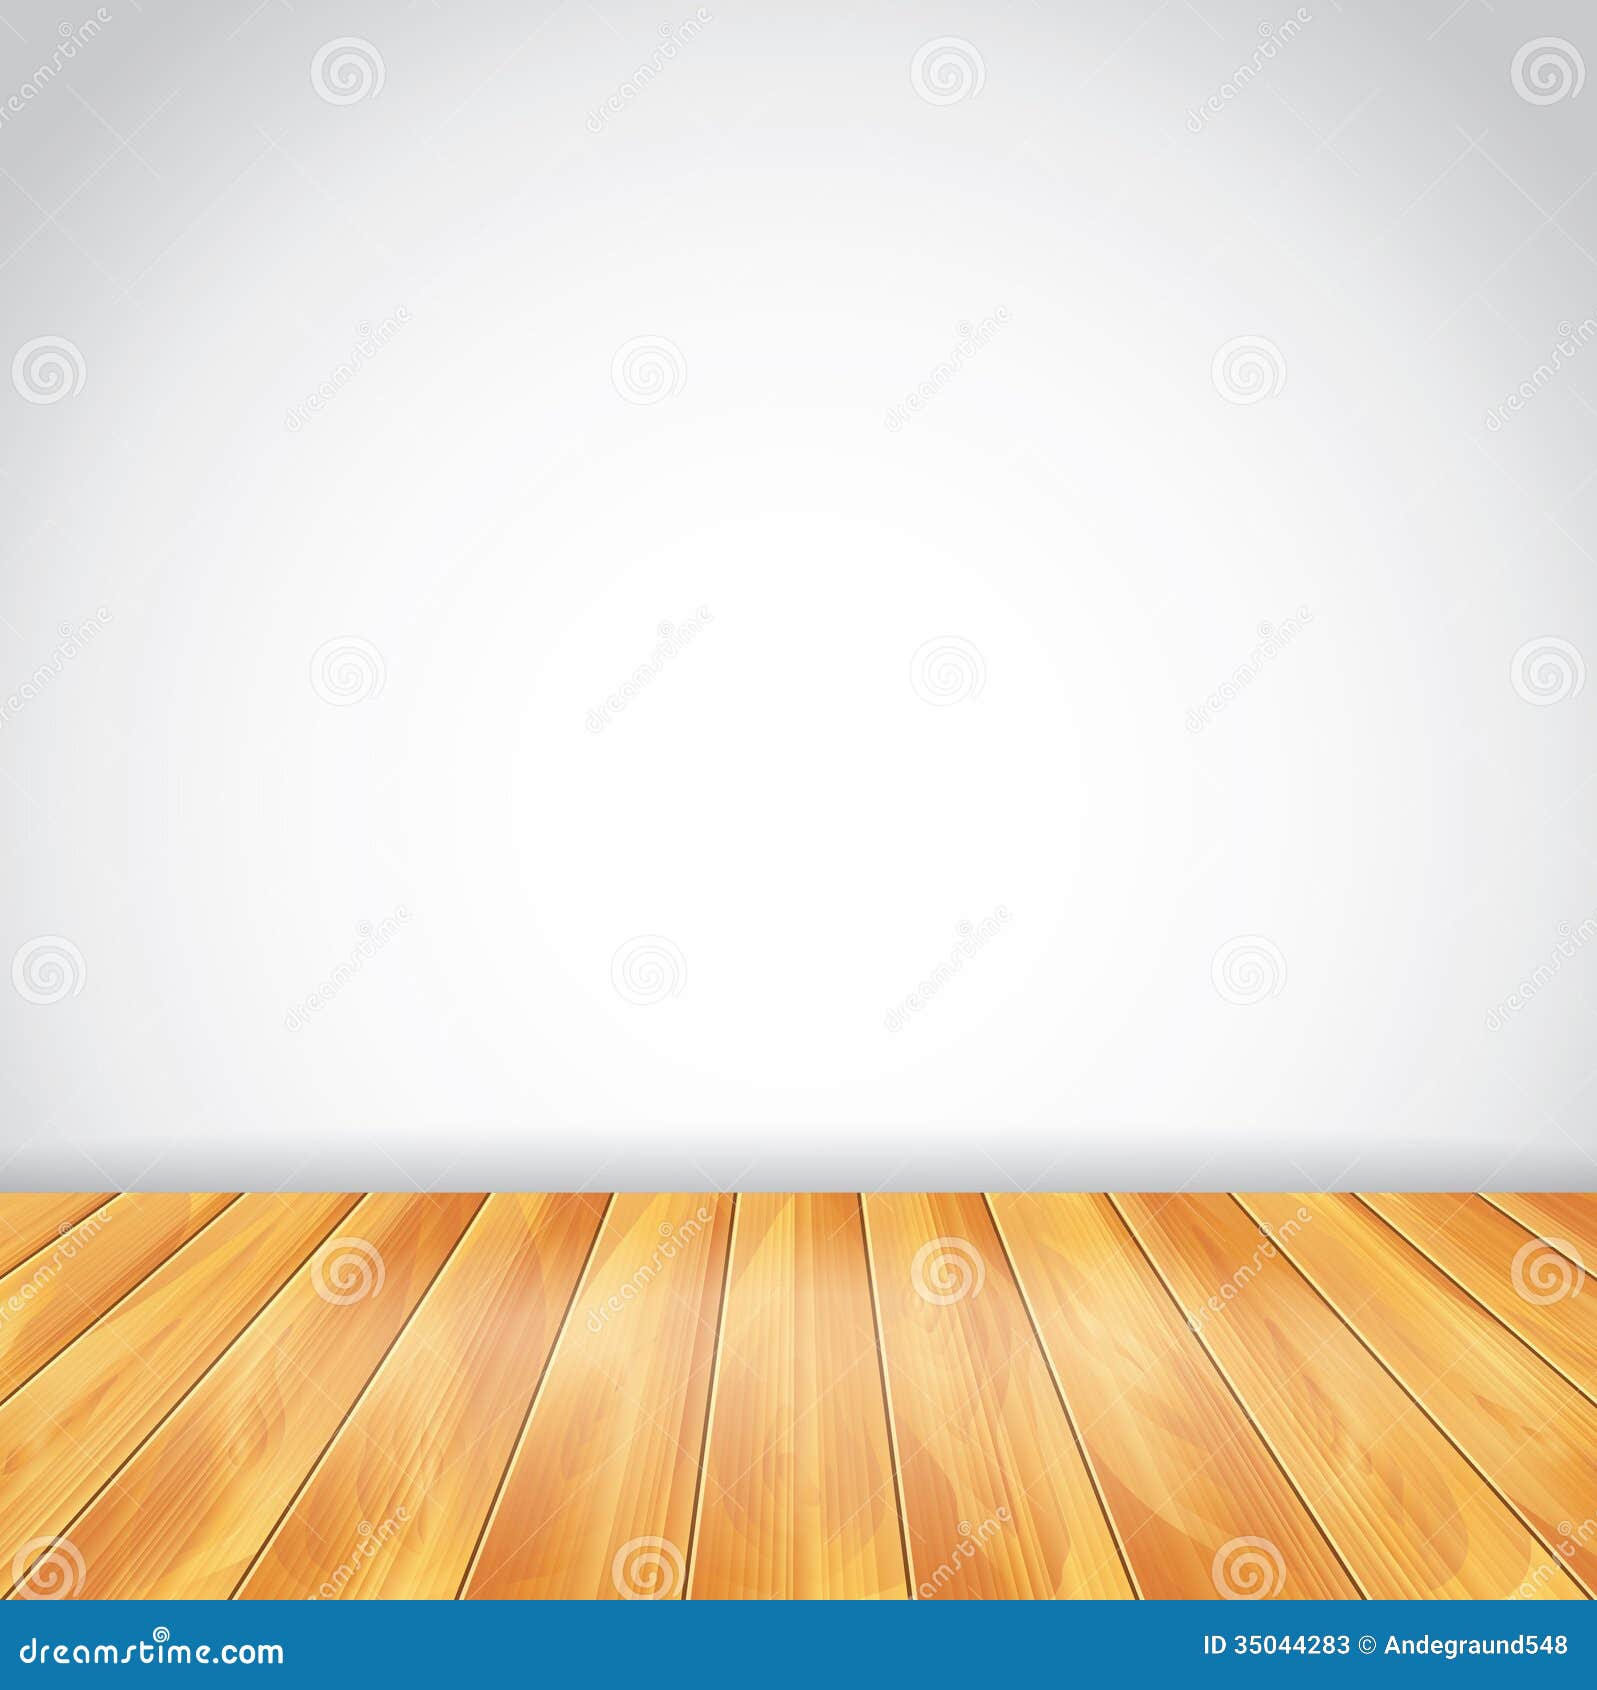 wood clipart background - photo #36